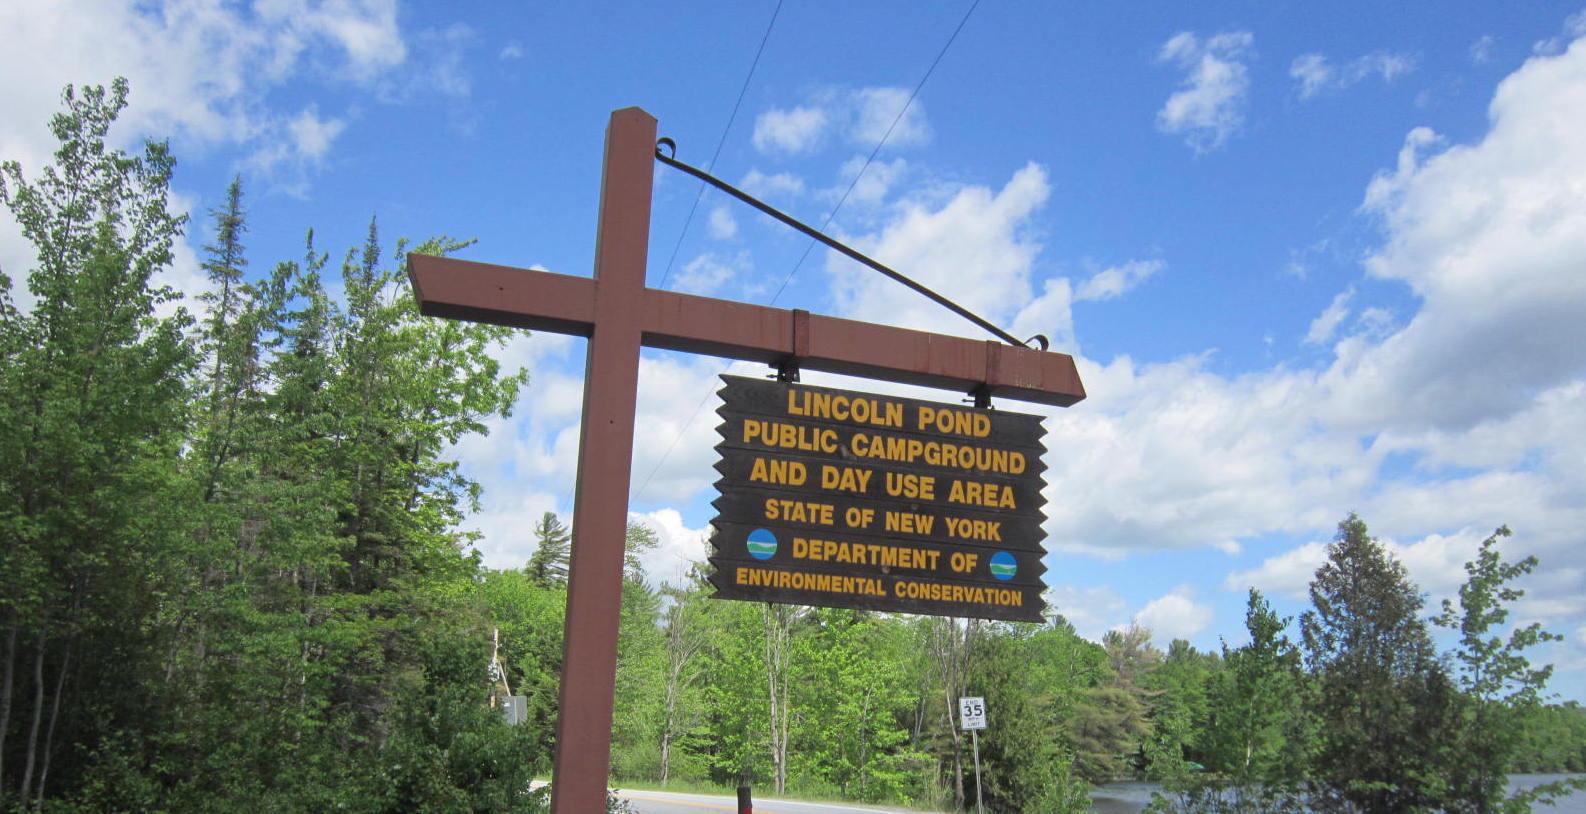 A yellow and brown sign marking a campground entrance.